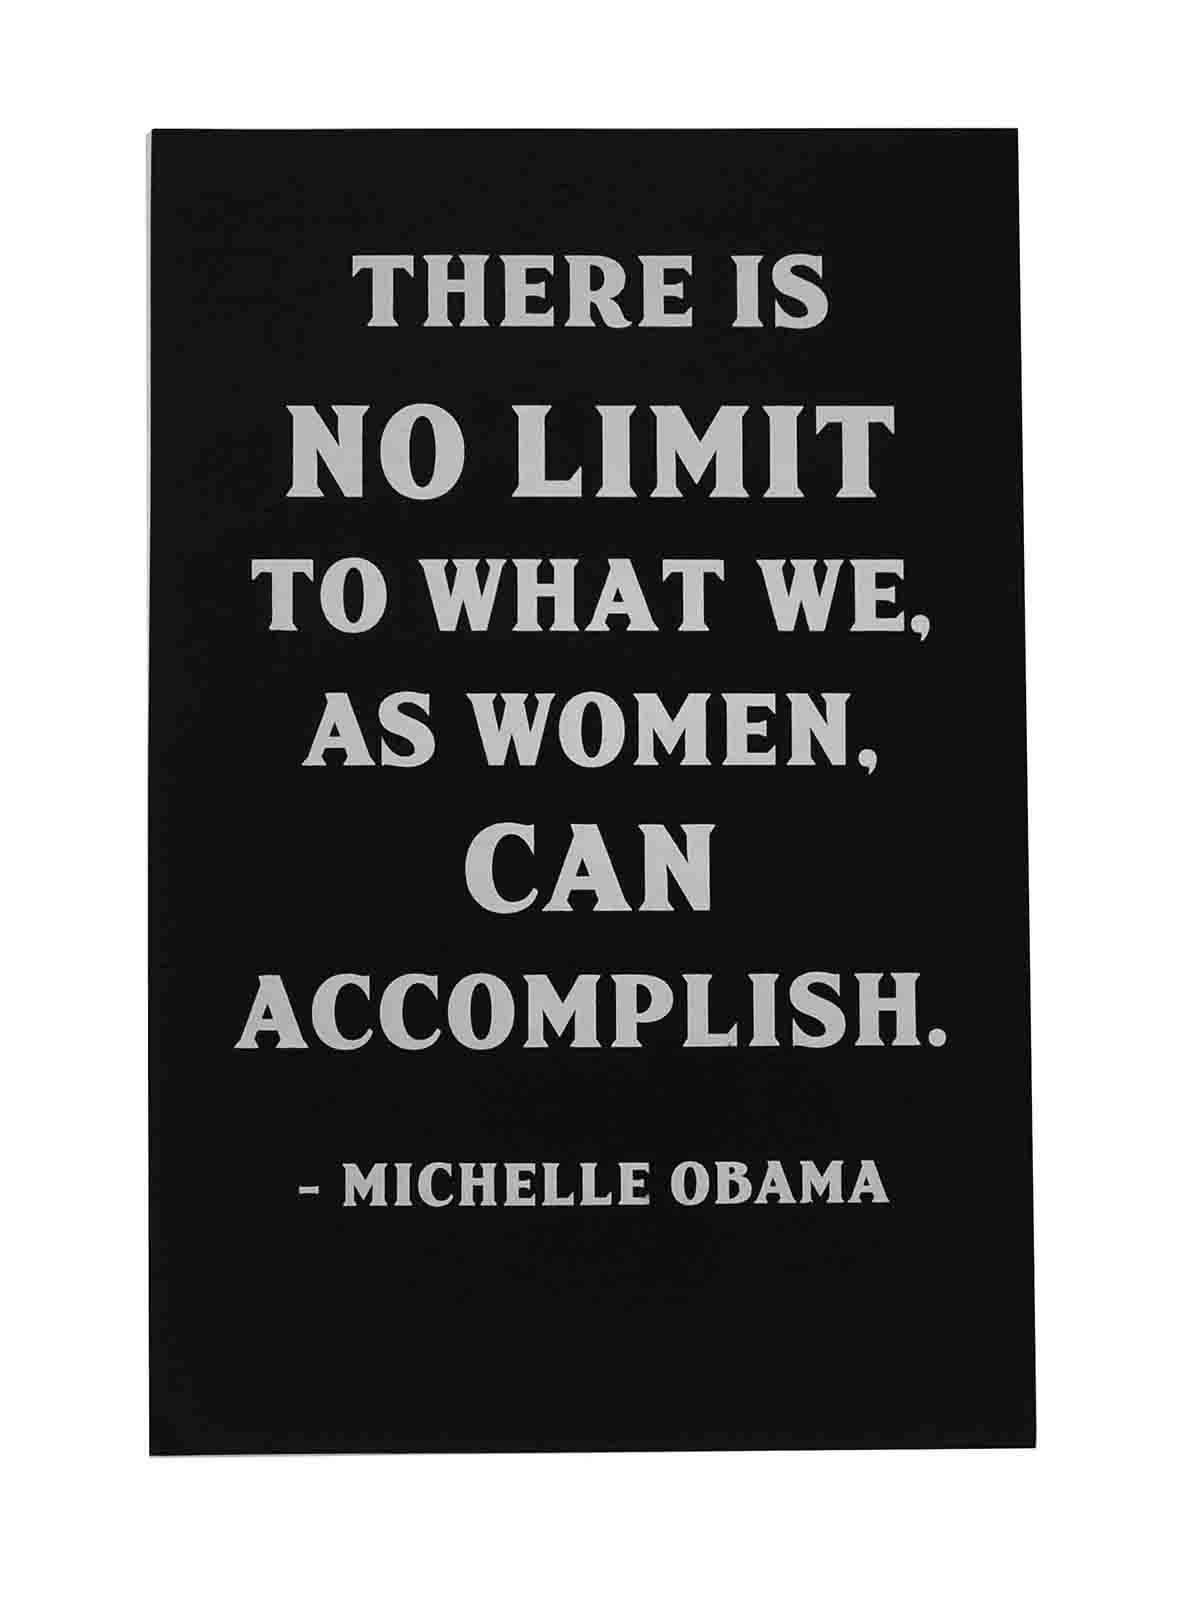 Ape_Bleakney_'There Is No Limit' Women's March Poster on Construction Blacktop, 12.5''x19''.jpg